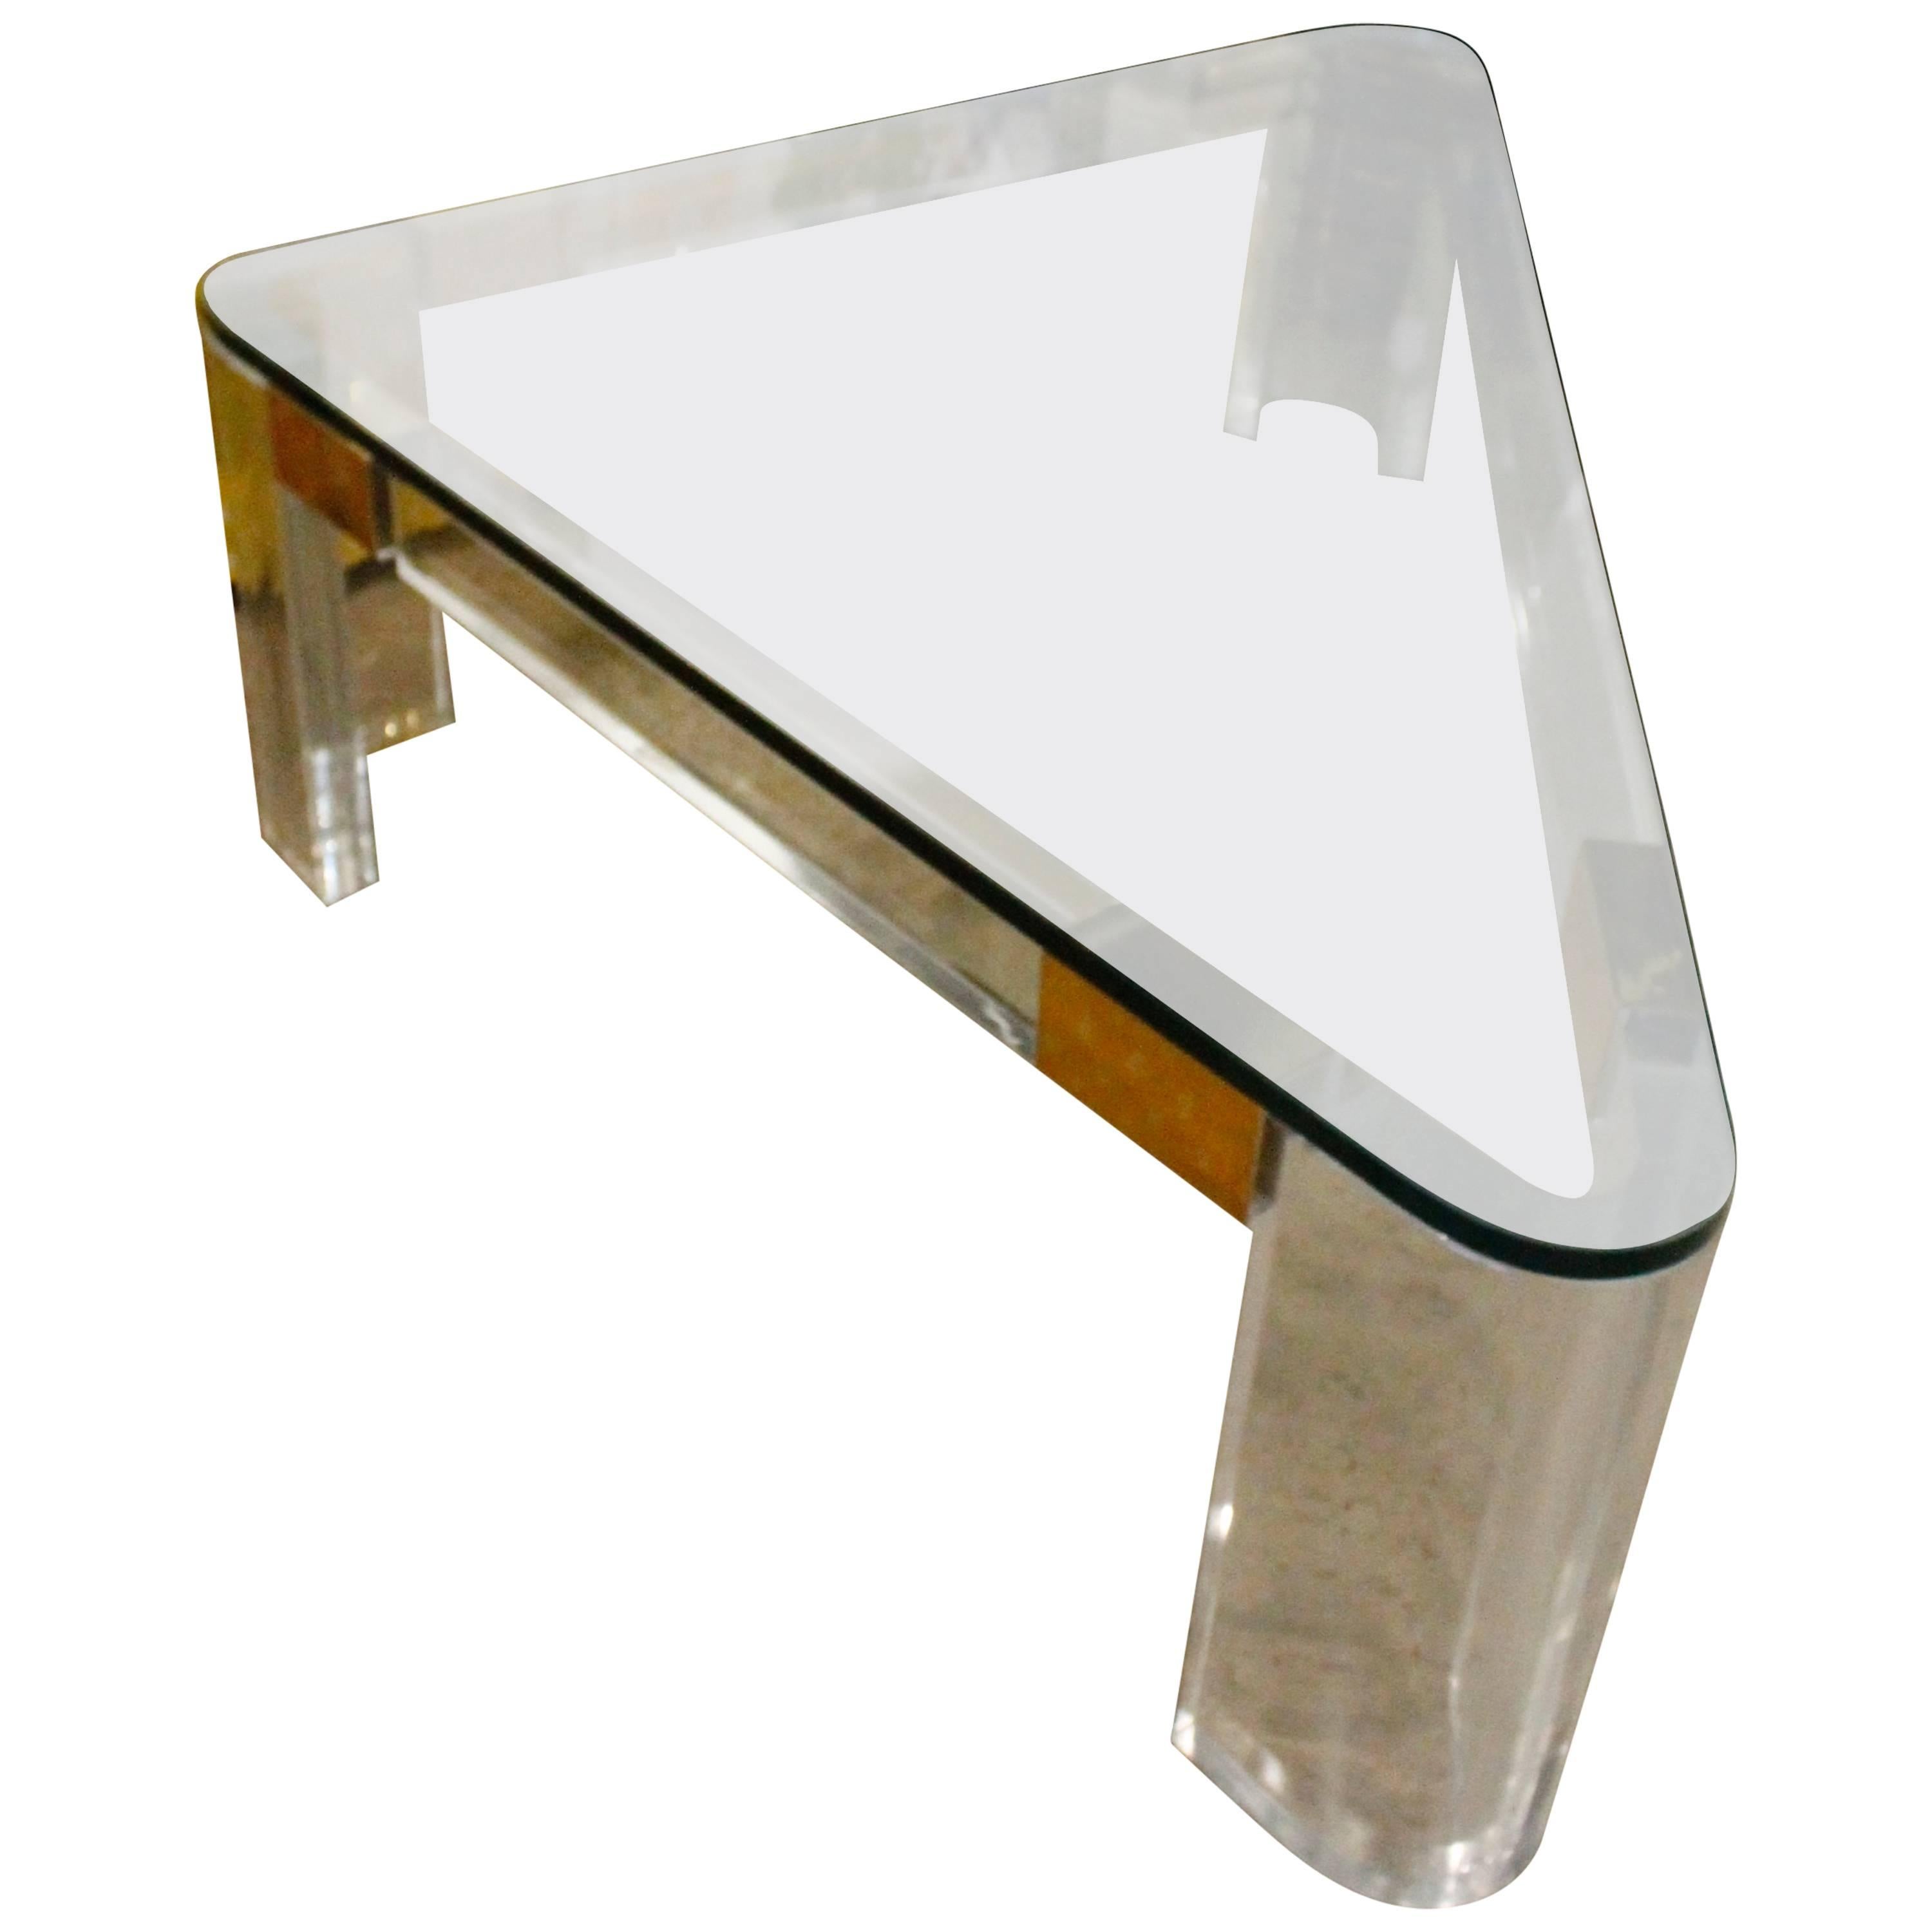 Charles Hollis Jones Lucite and Brass Triangle Coffee or Cocktail Table For Sale